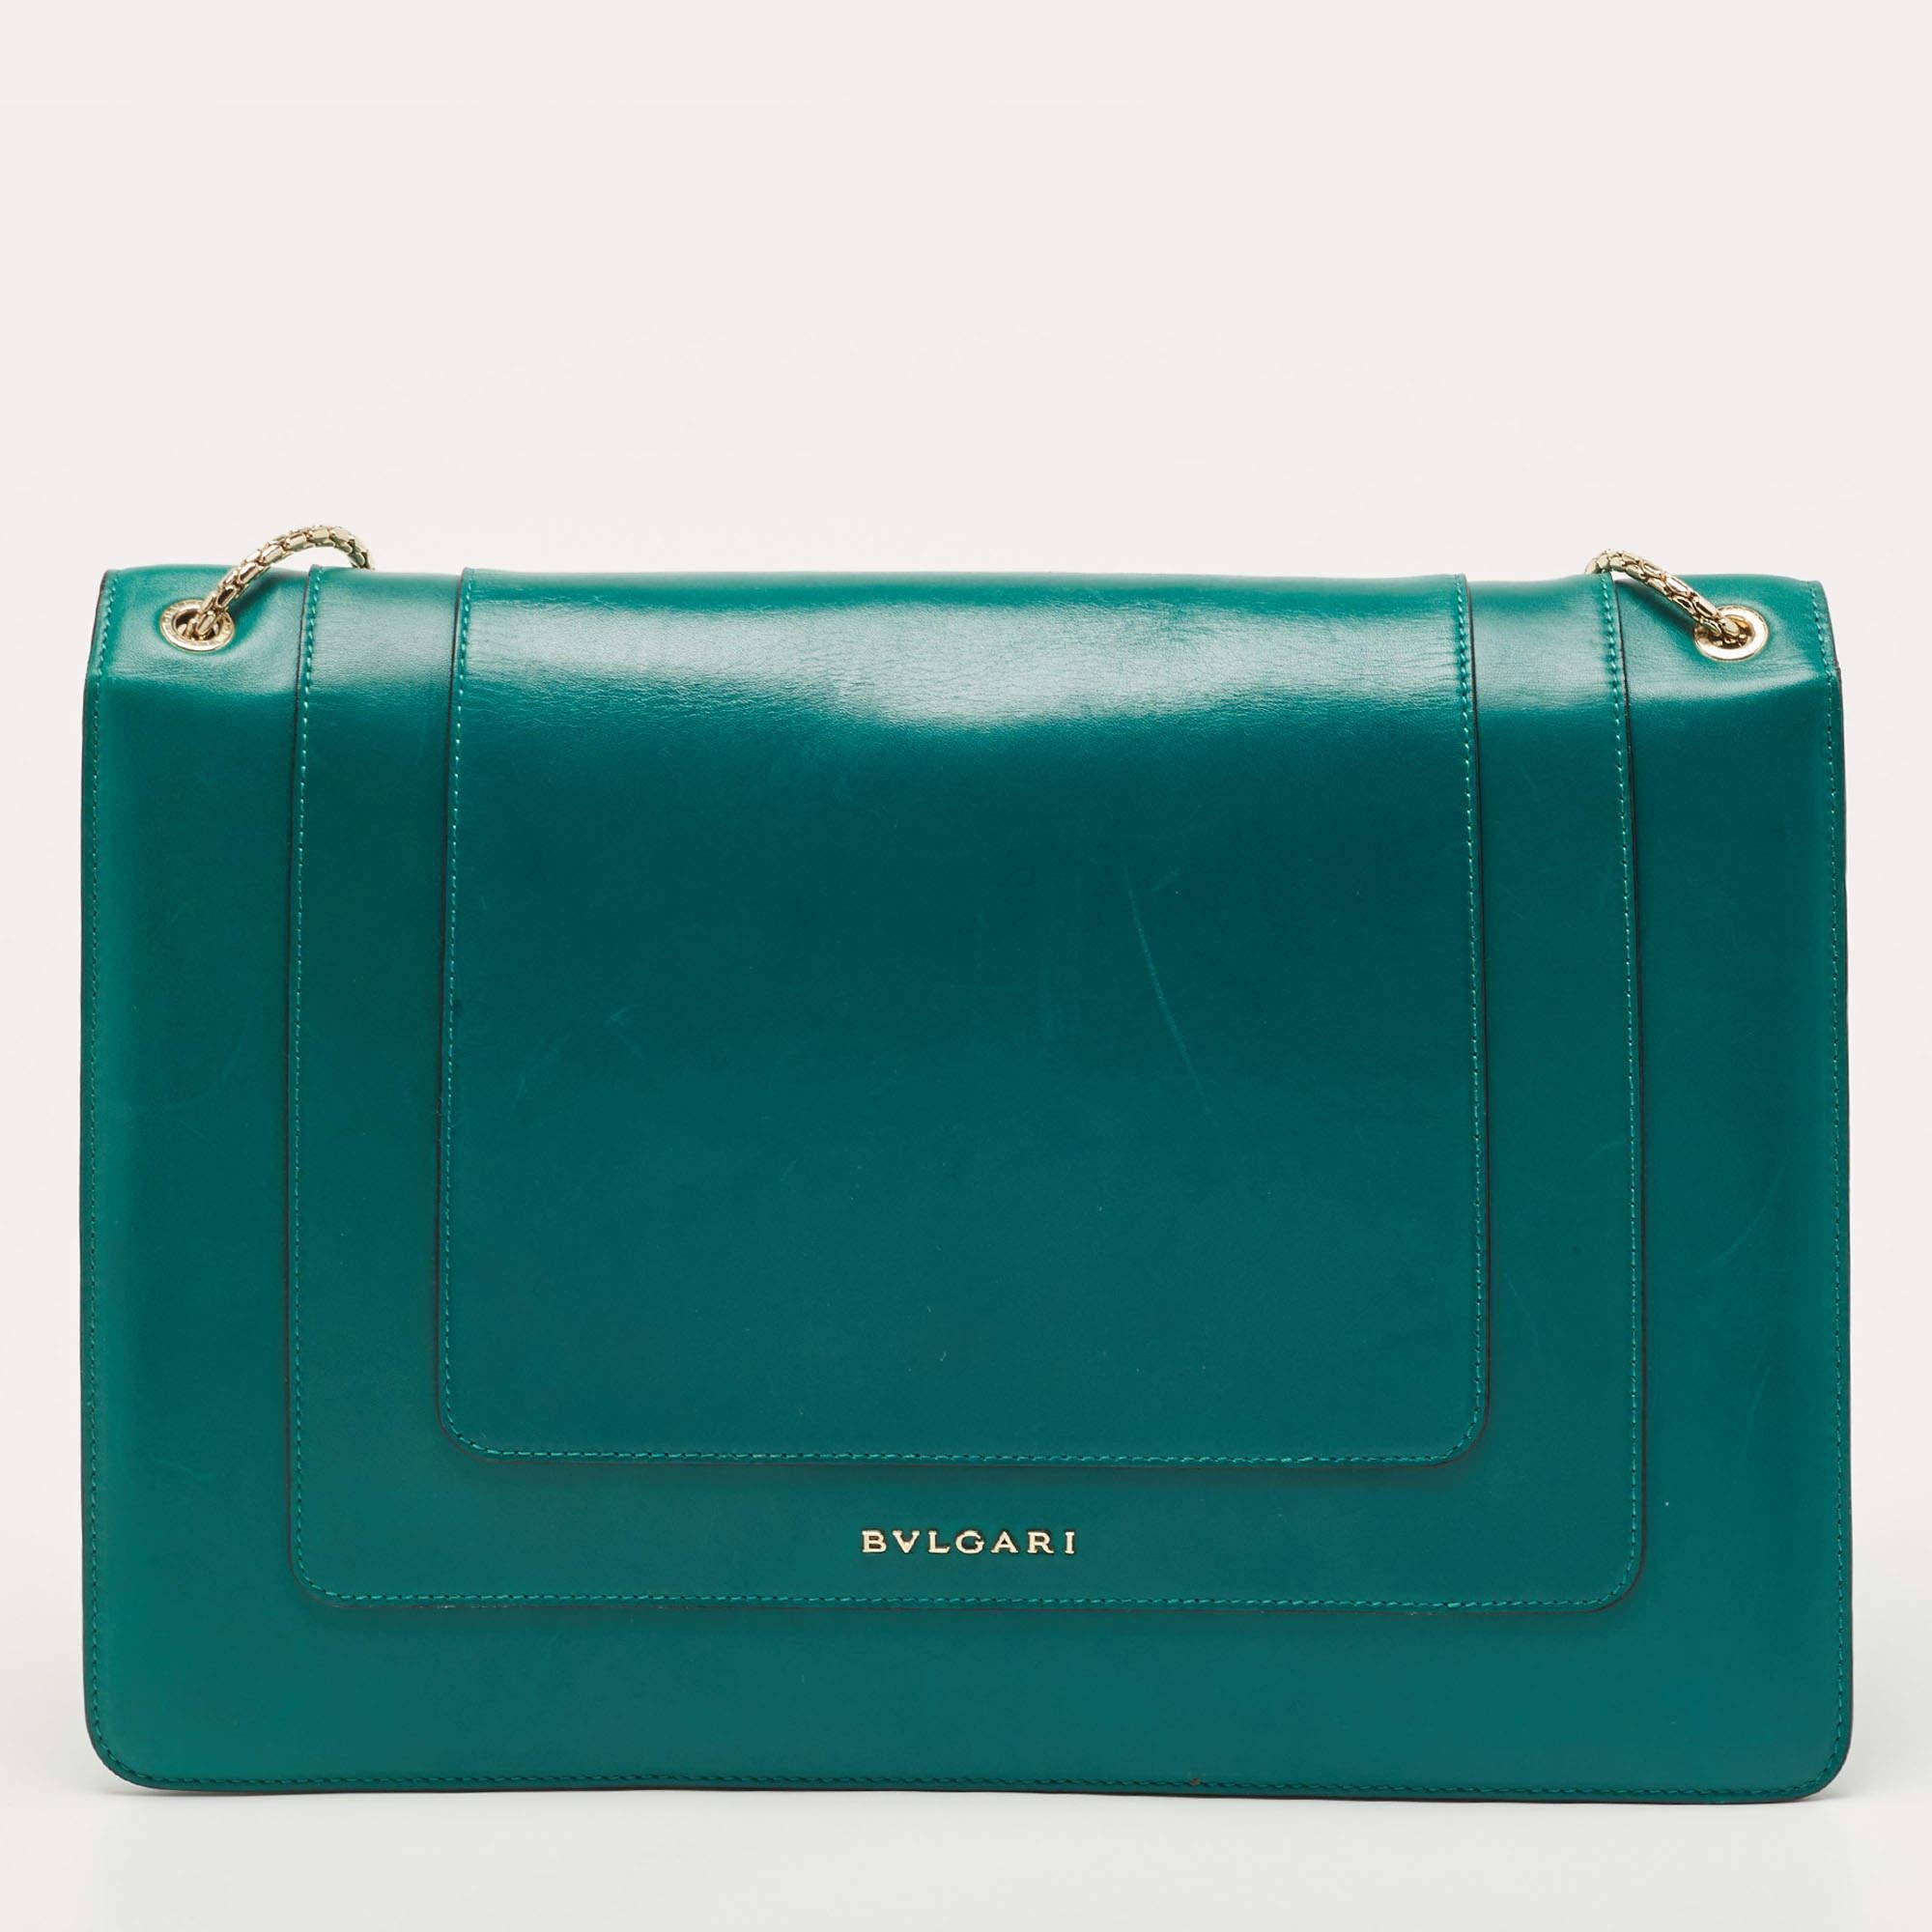 Most designs from Bvlgari, with their striking elements, pay tribute to the Roman roots, and this bag is no different. Made from green leather, it is an accessory of utility and luxury. Perfectly sized, the interior has enough room to dutifully